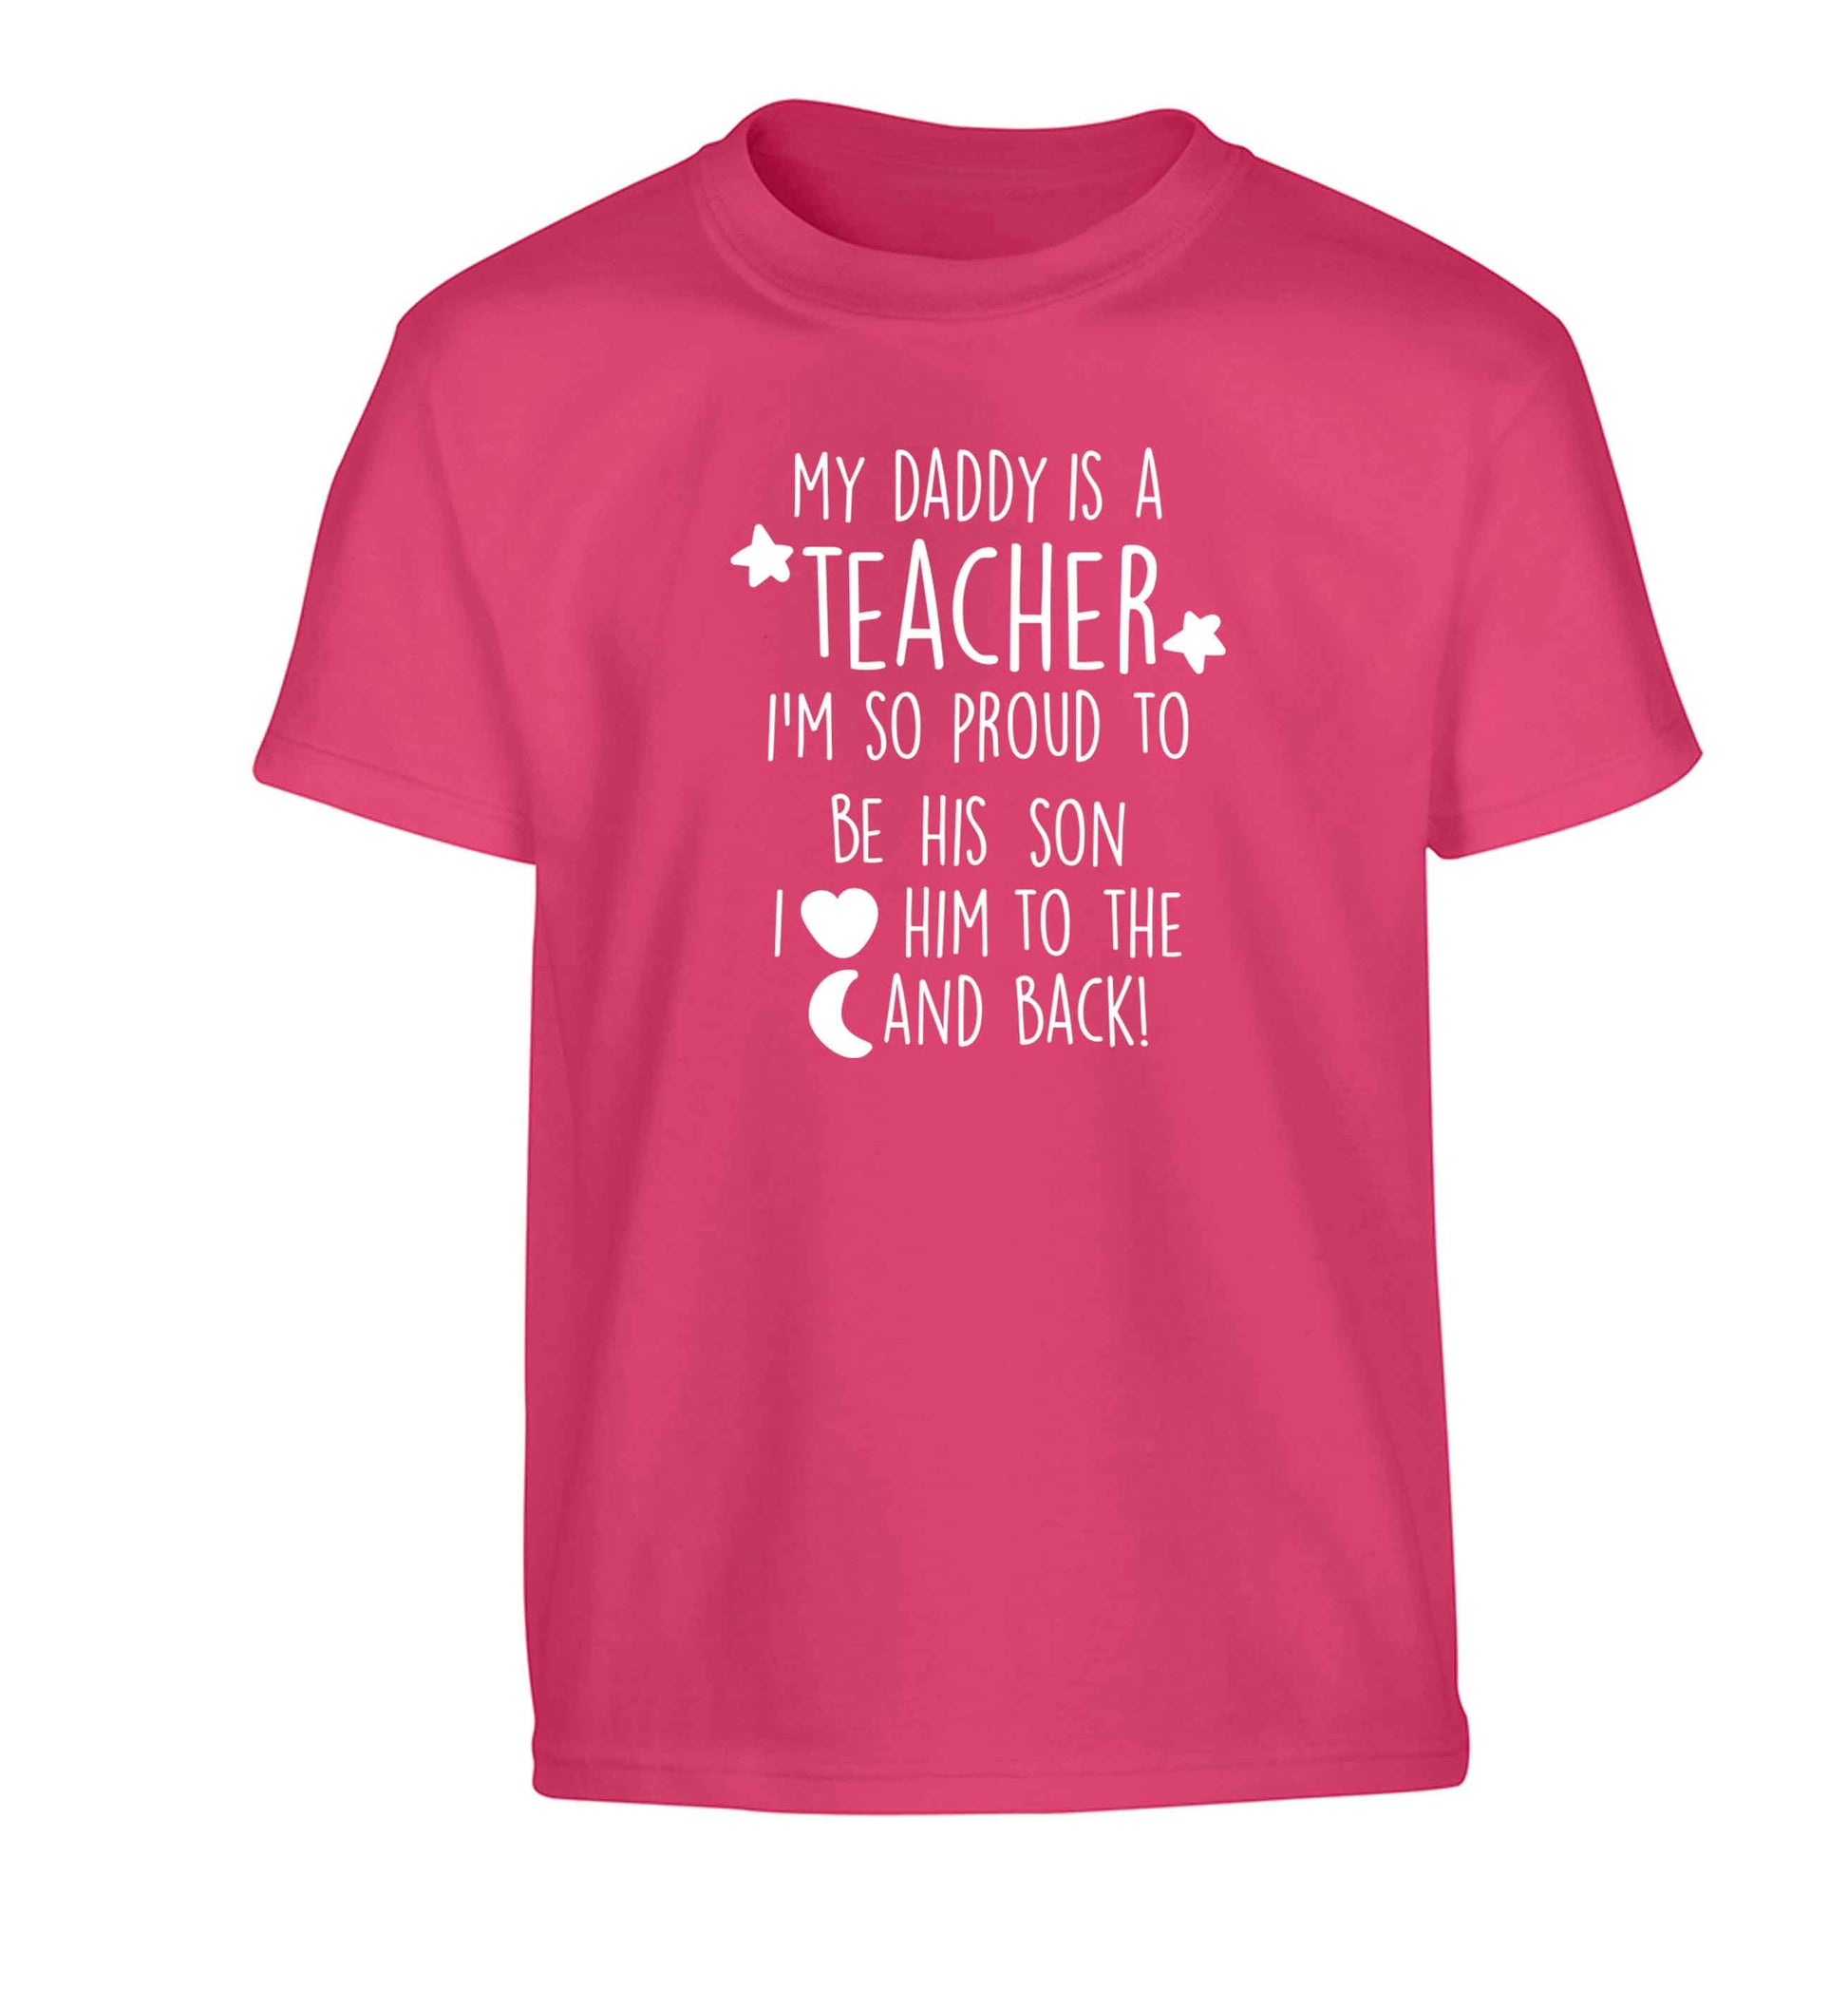 My daddy is a teacher I'm so proud to be his son I love her to the moon and back Children's pink Tshirt 12-13 Years